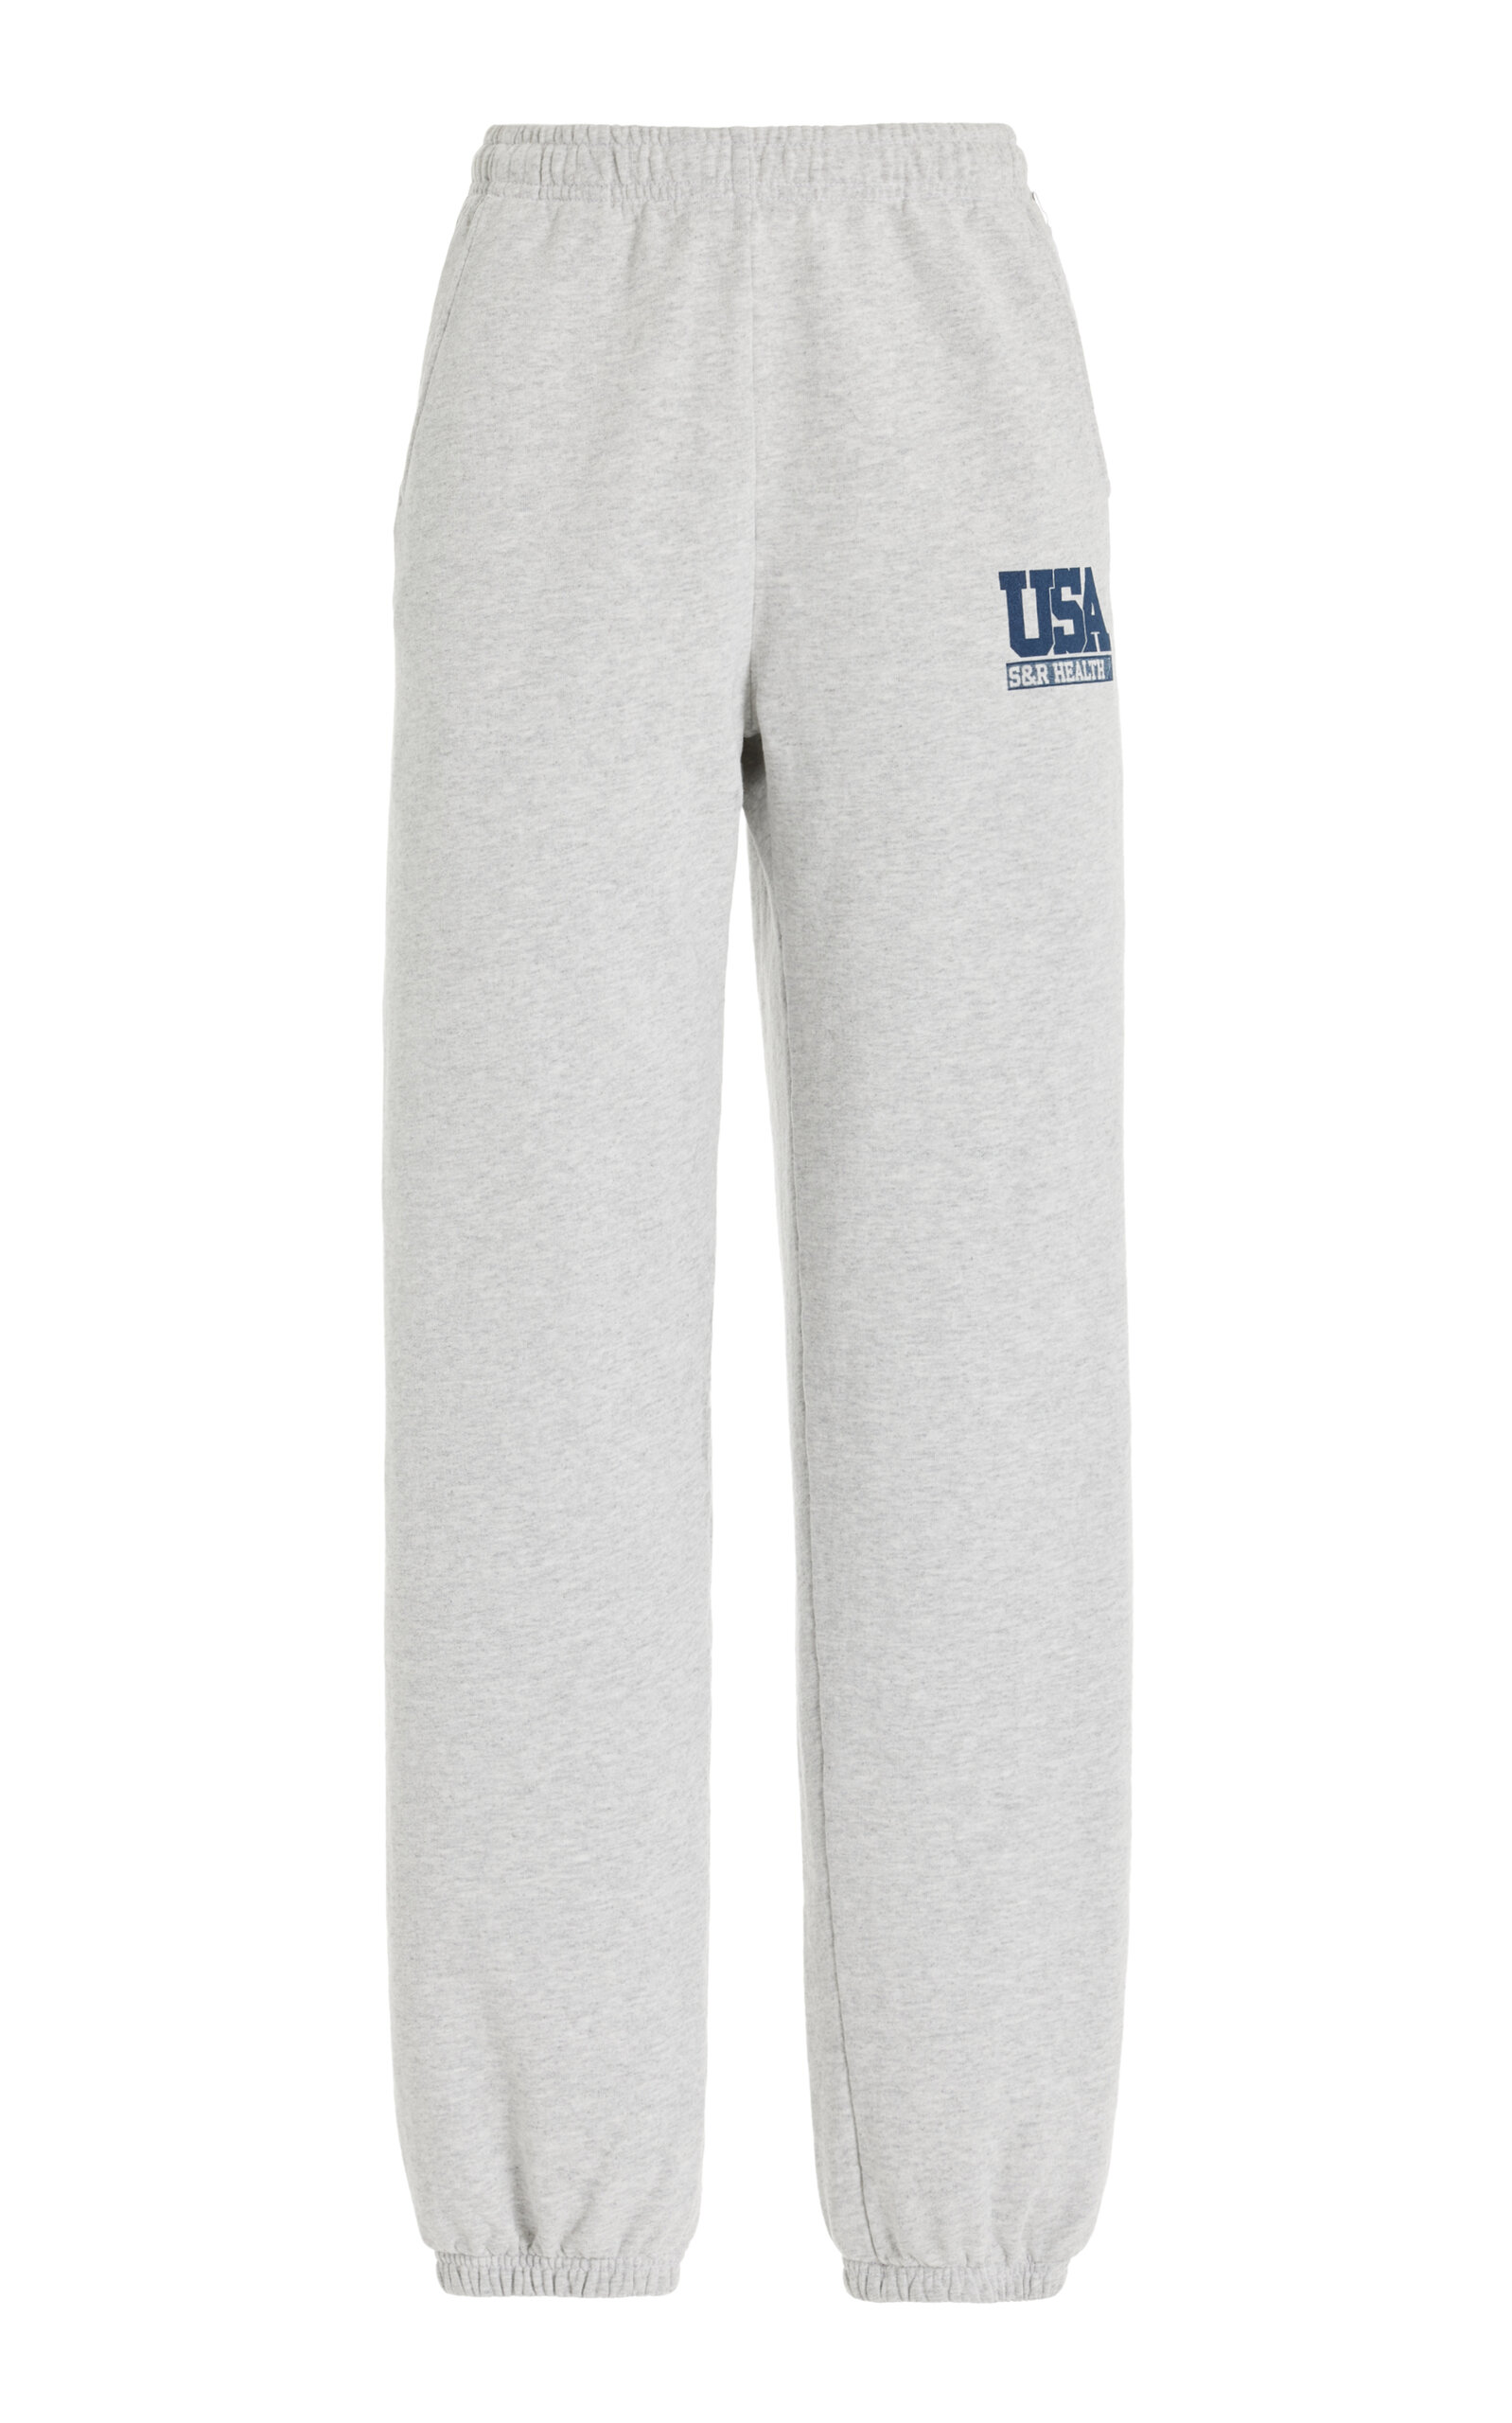 SPORTY AND RICH TEAM USA COTTON SWEATPANTS